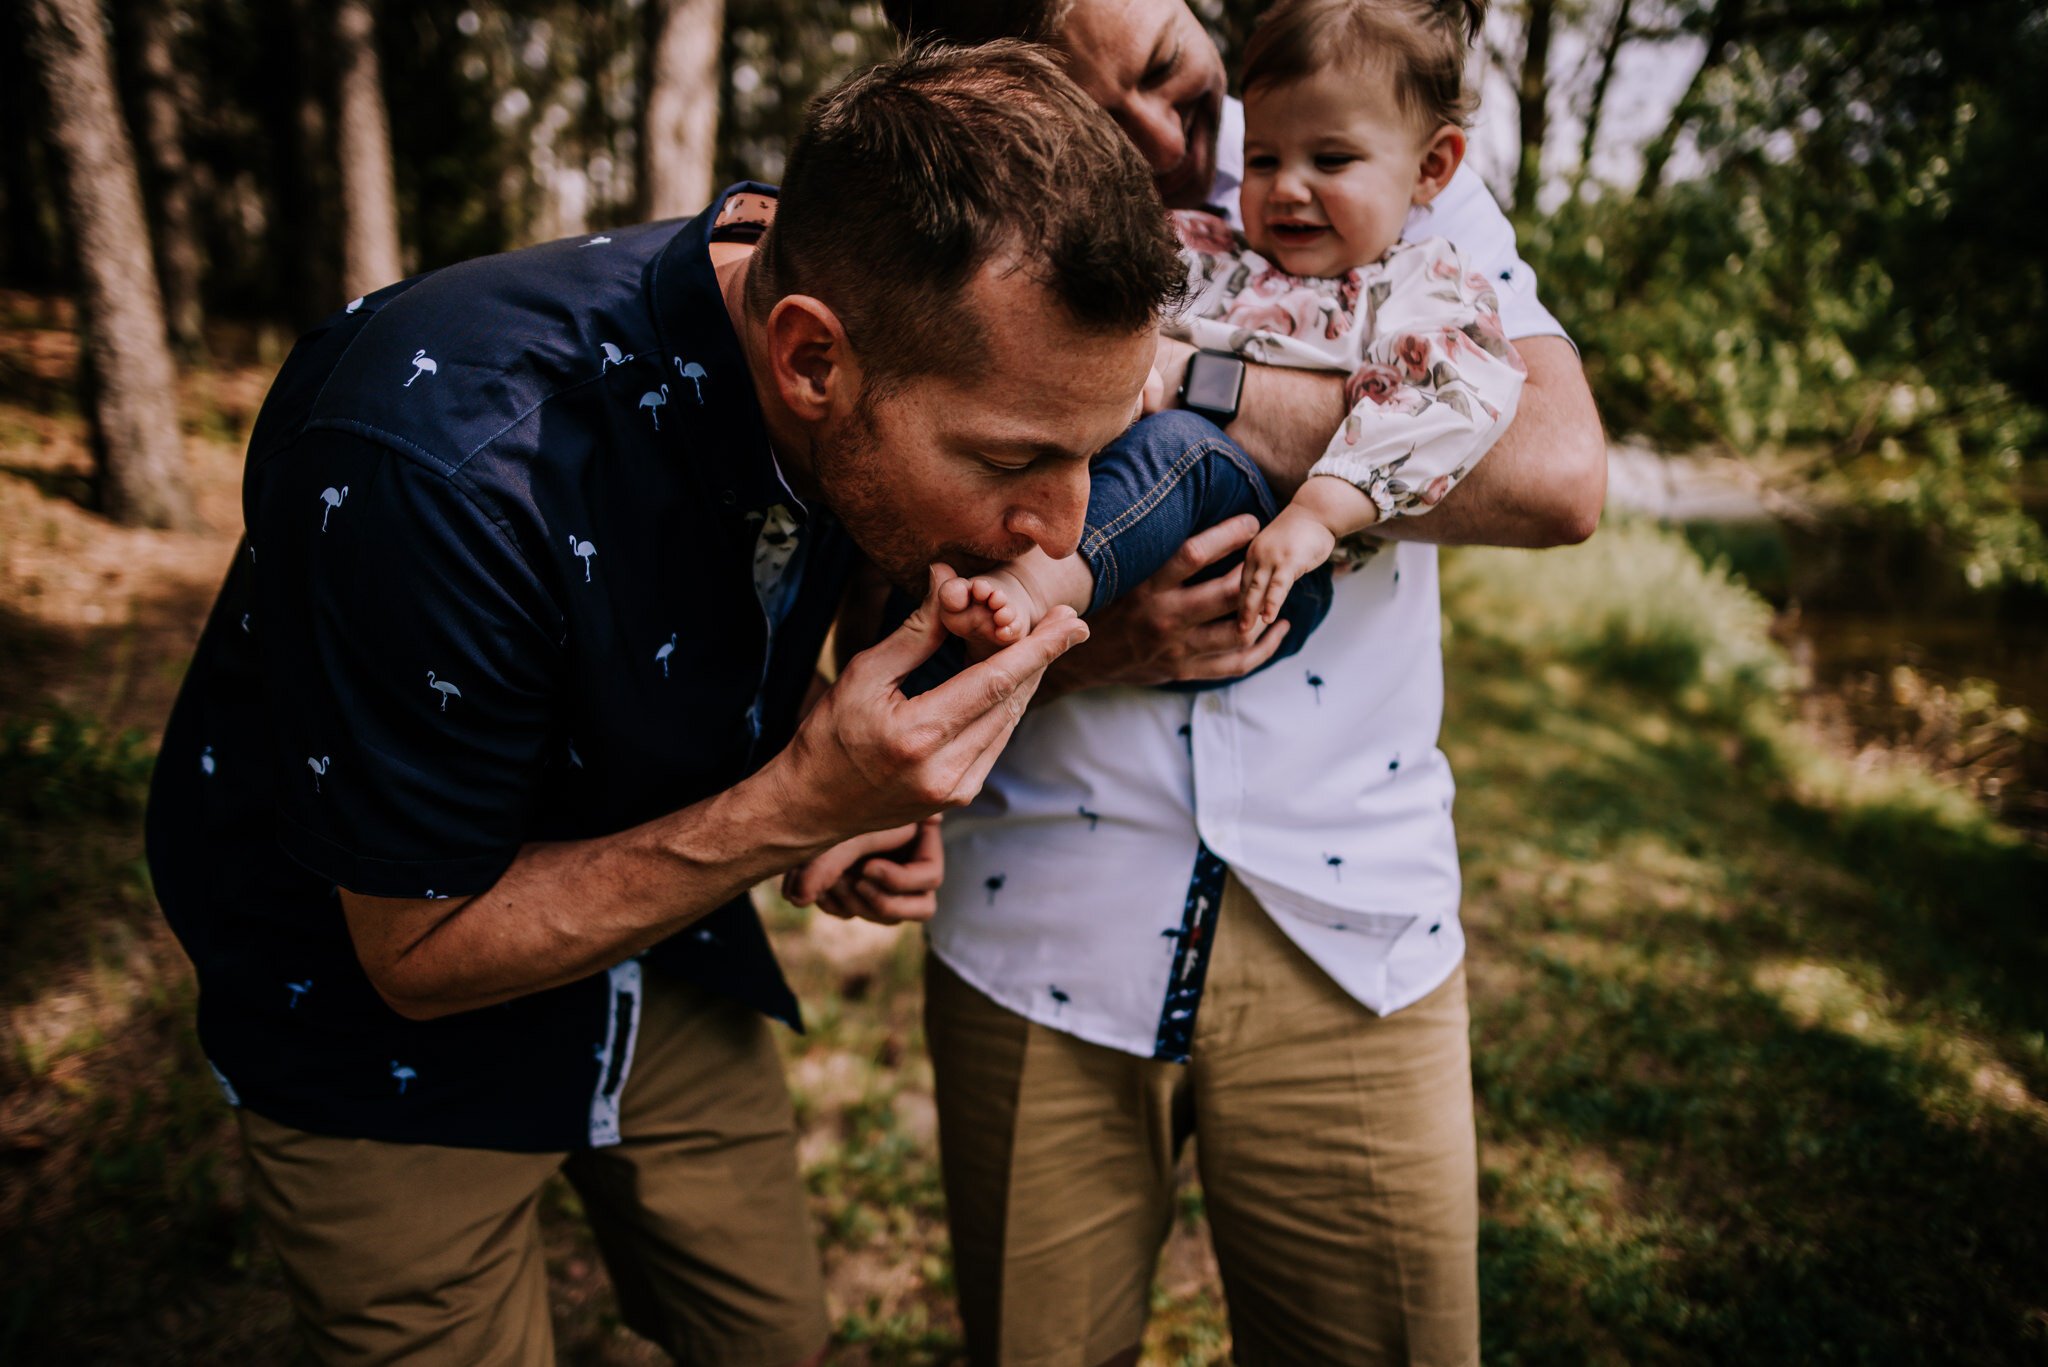 Paul+and+Dave+Gay+Couple+Family+Session+Colorado+Springs+Colorado+LGBTQ+Dads+Daughter+Wild+Prairie+Photography-17-2020.jpeg